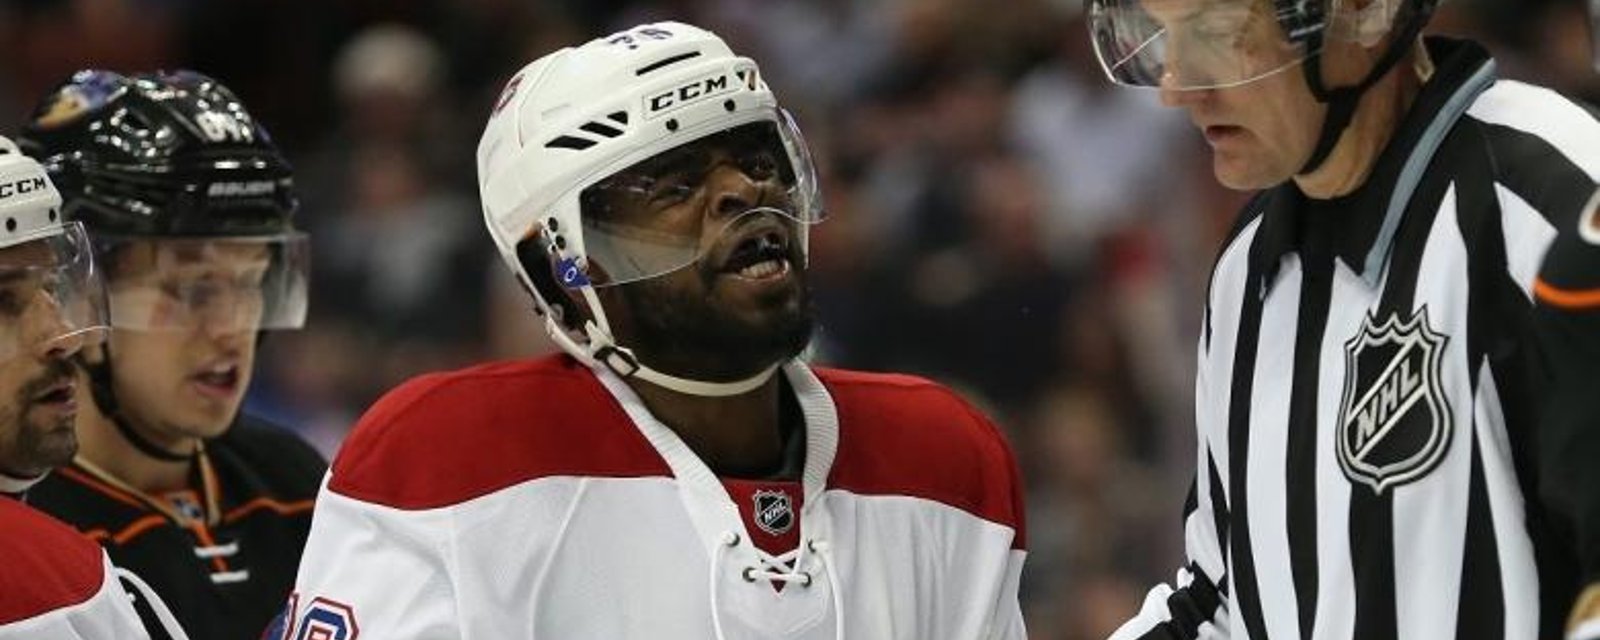 Retired NHL star says ugly rumors about P.K. Subban had some truth to them.